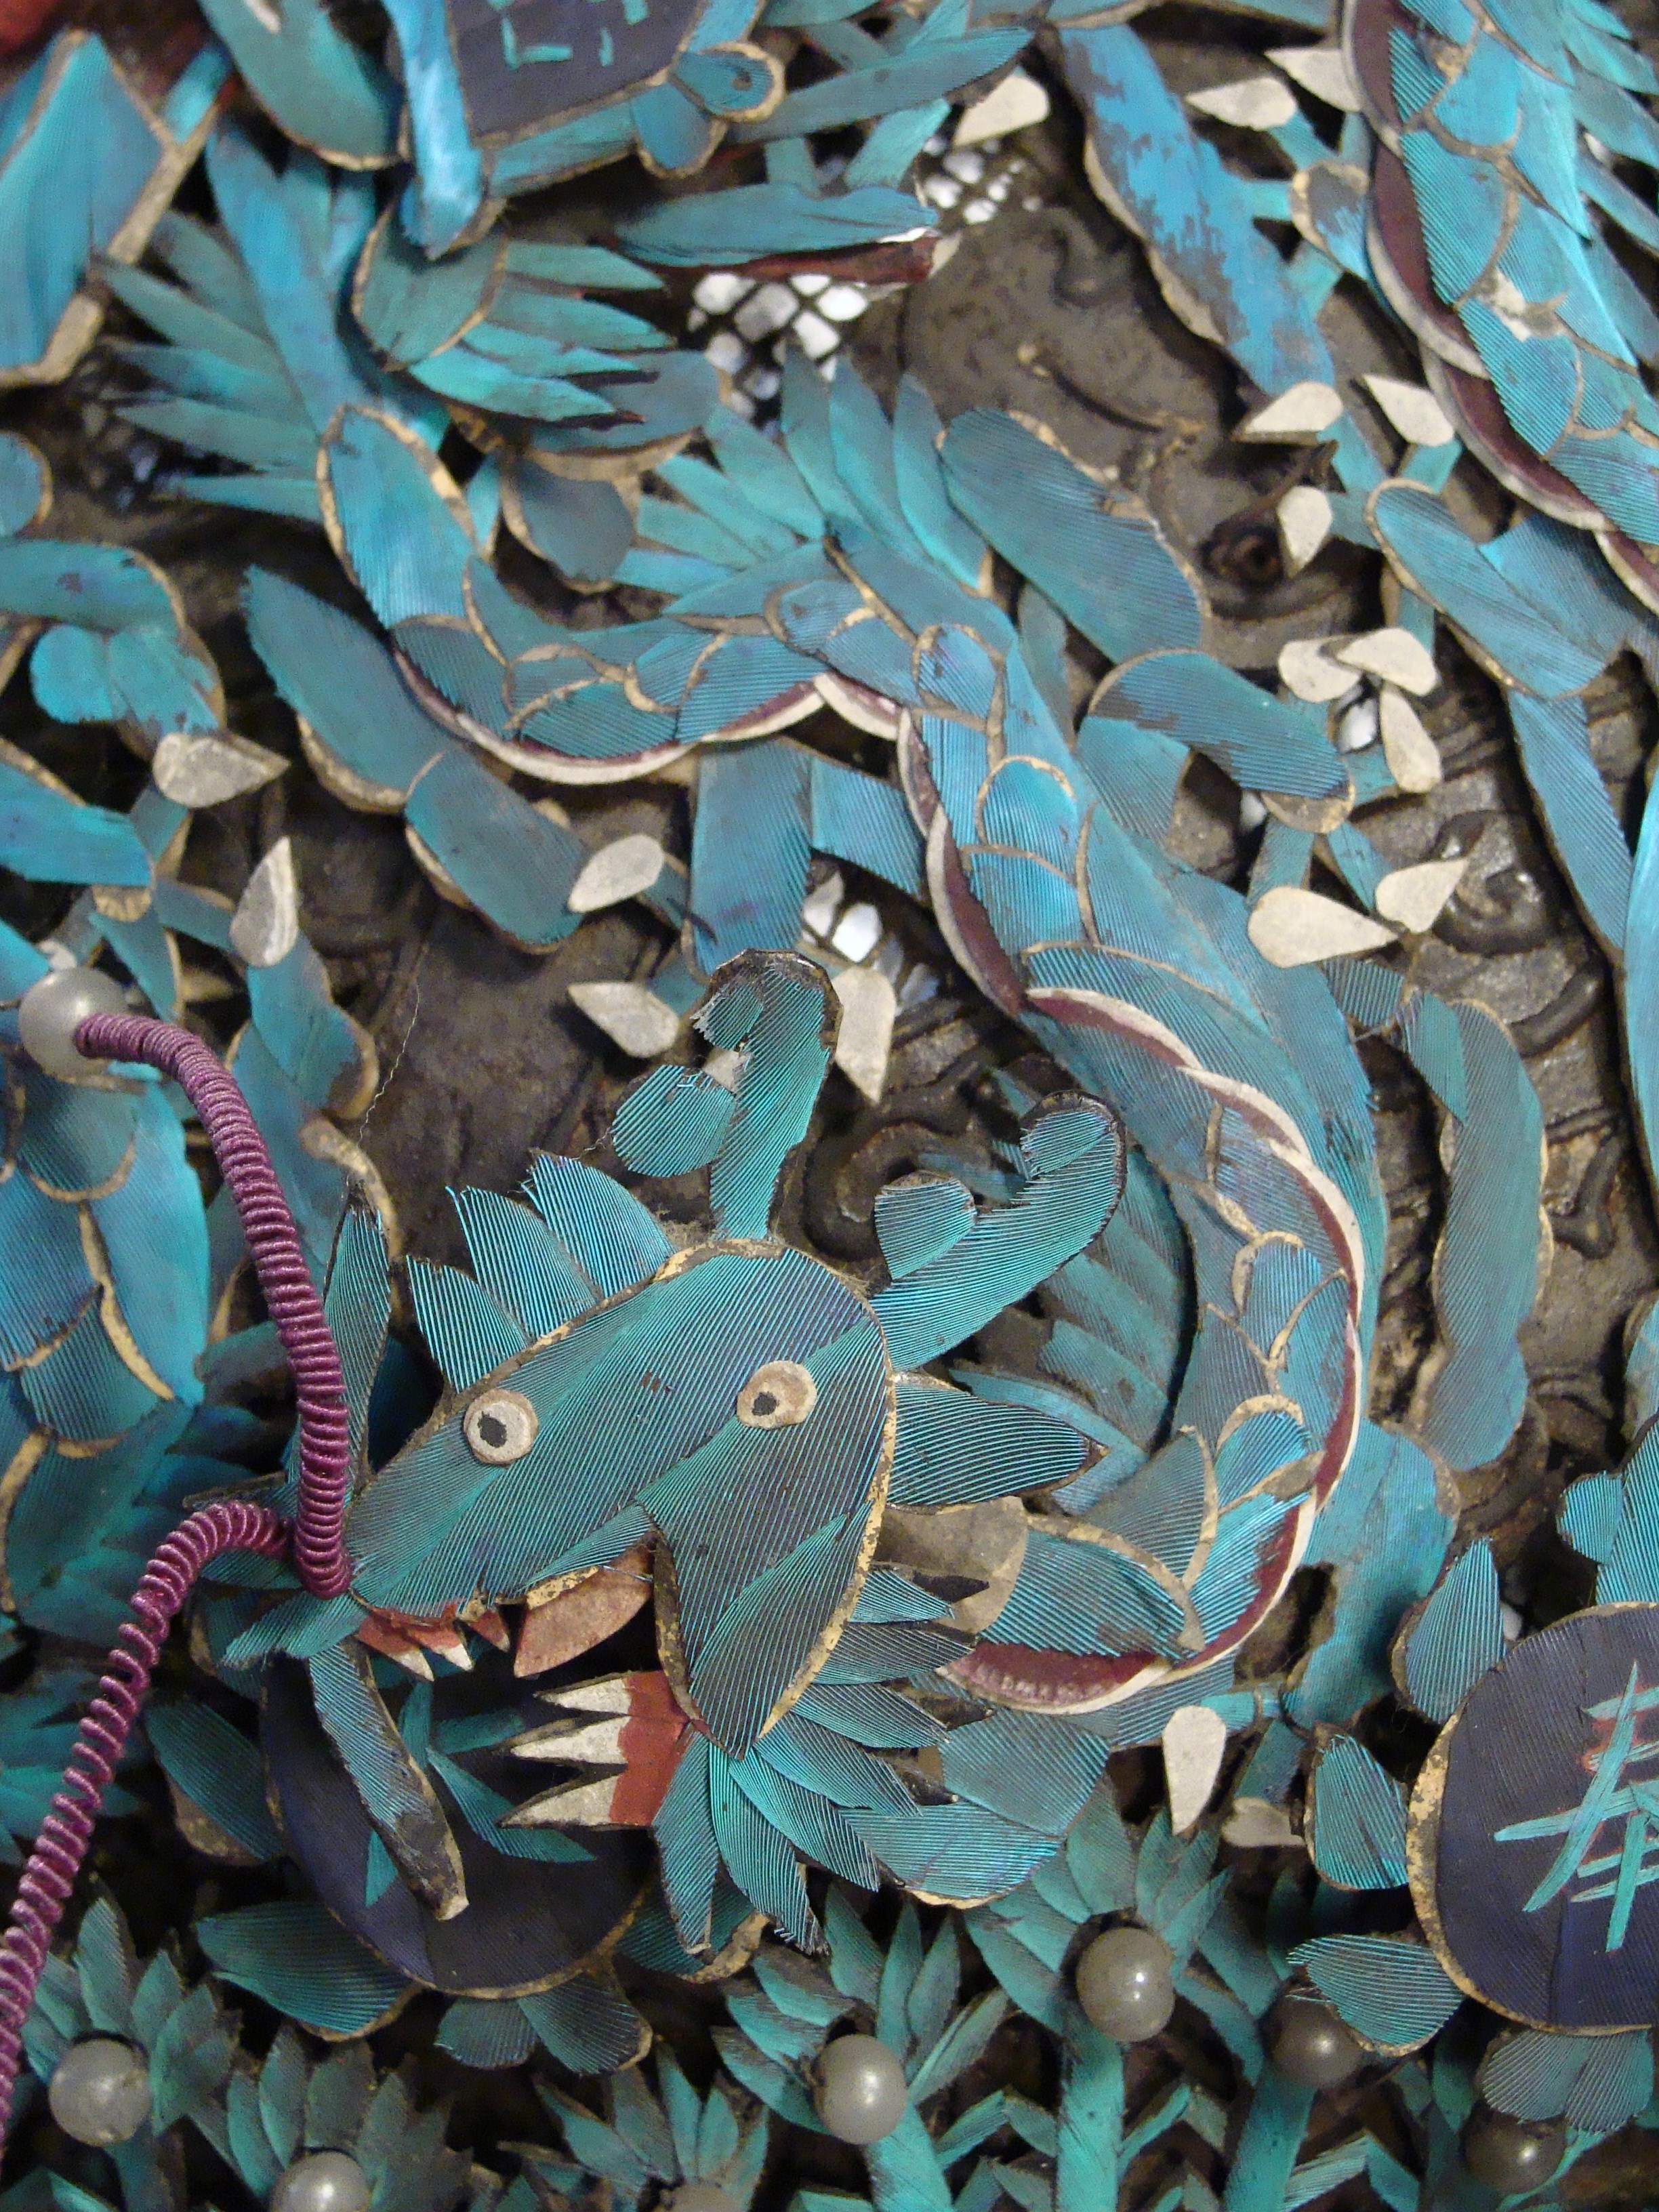 A dragon on the headdress before conservation